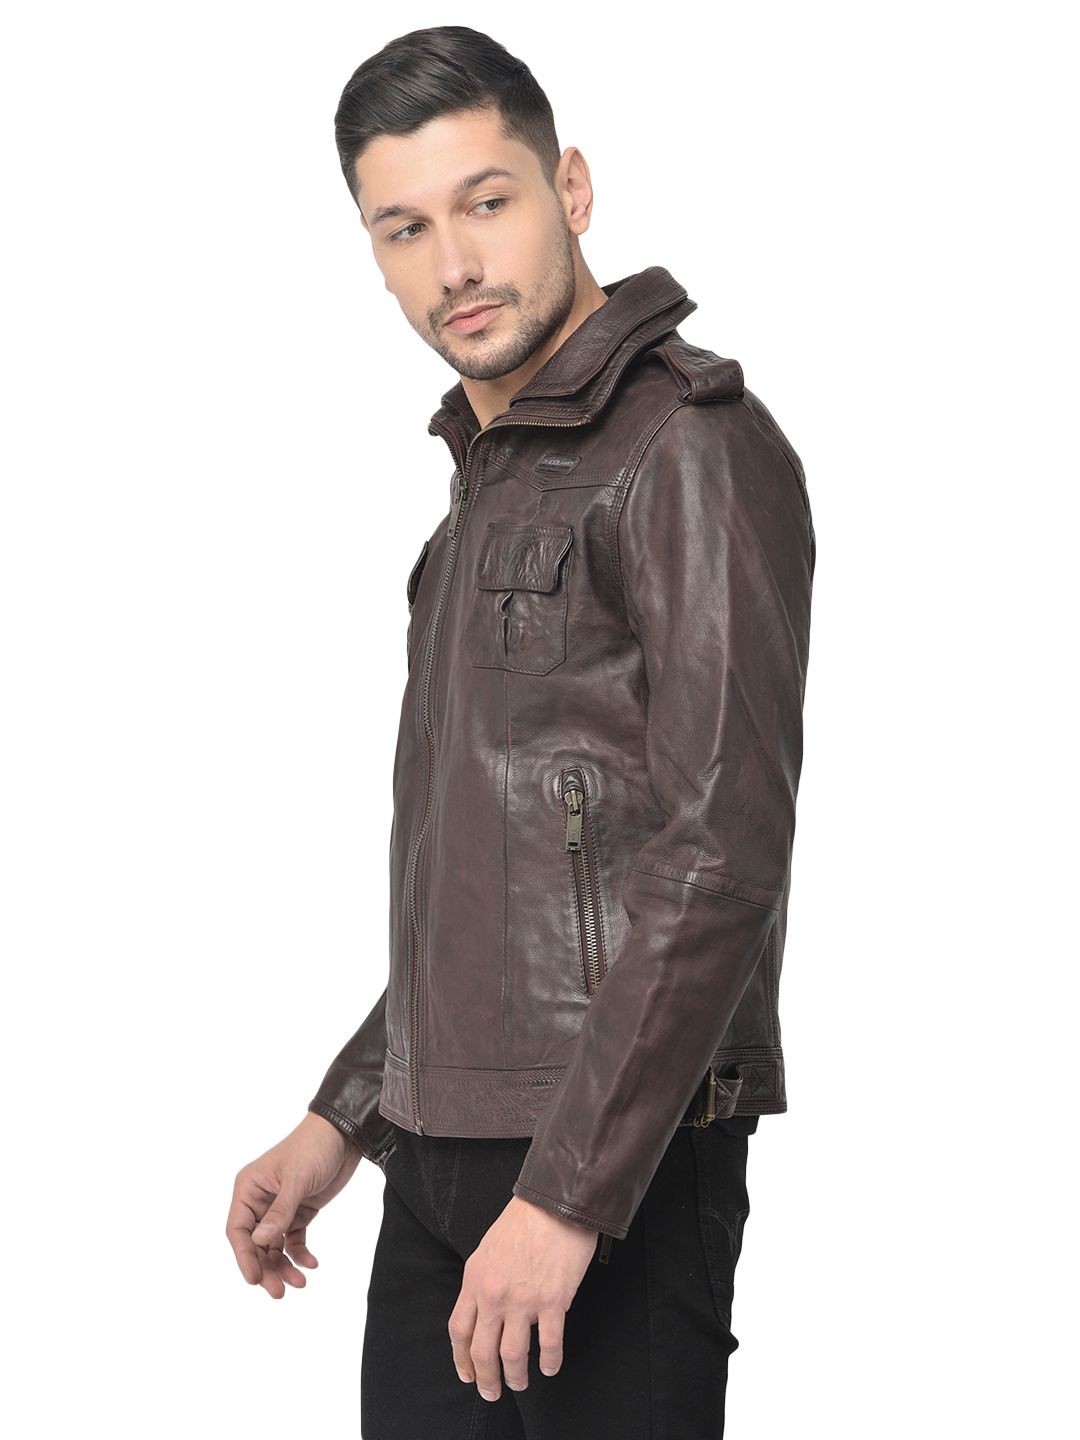 Cherry leather jacket for men